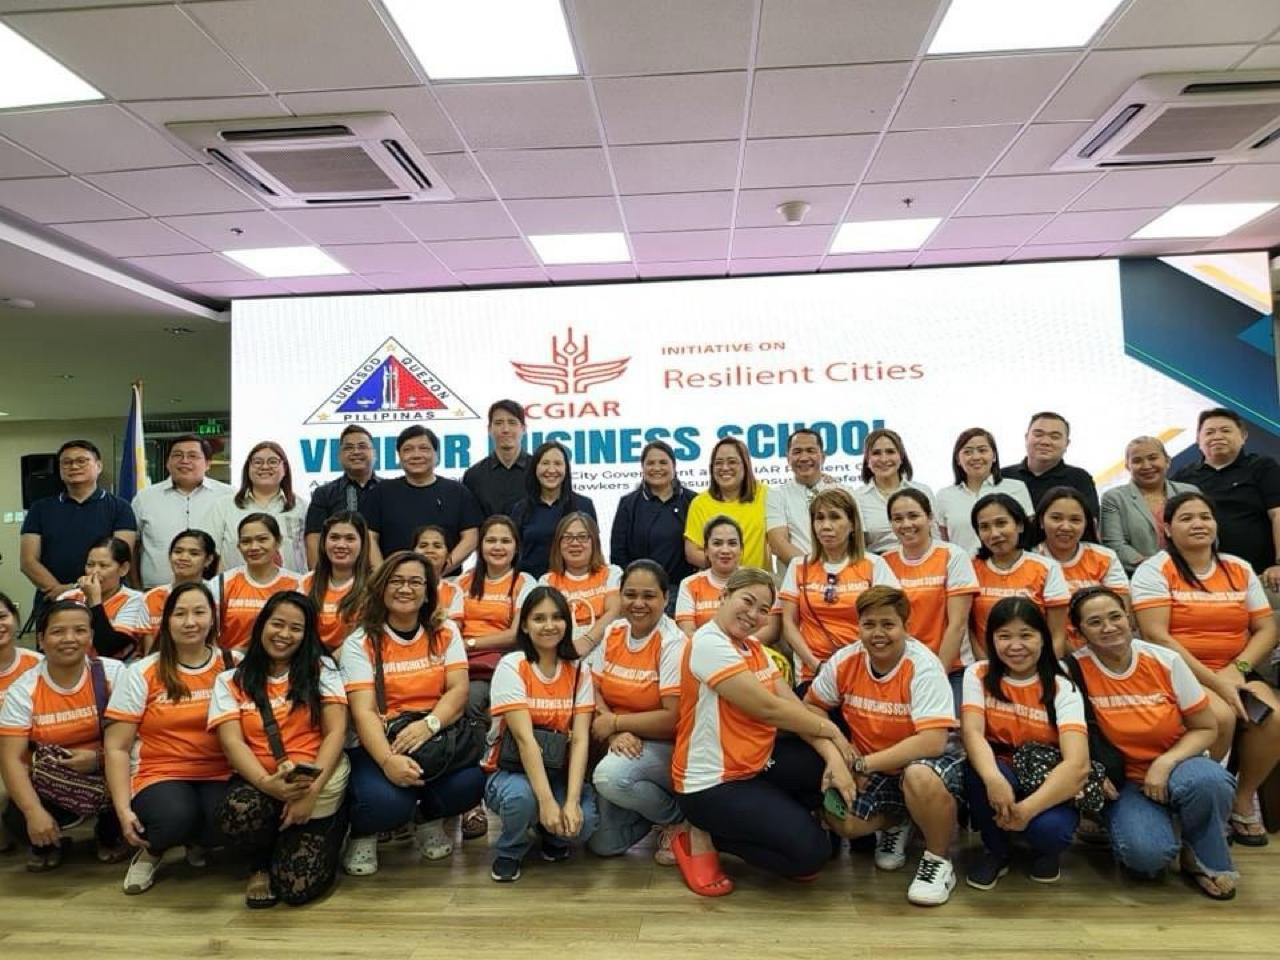 belmonte launches country’s first vendor business school